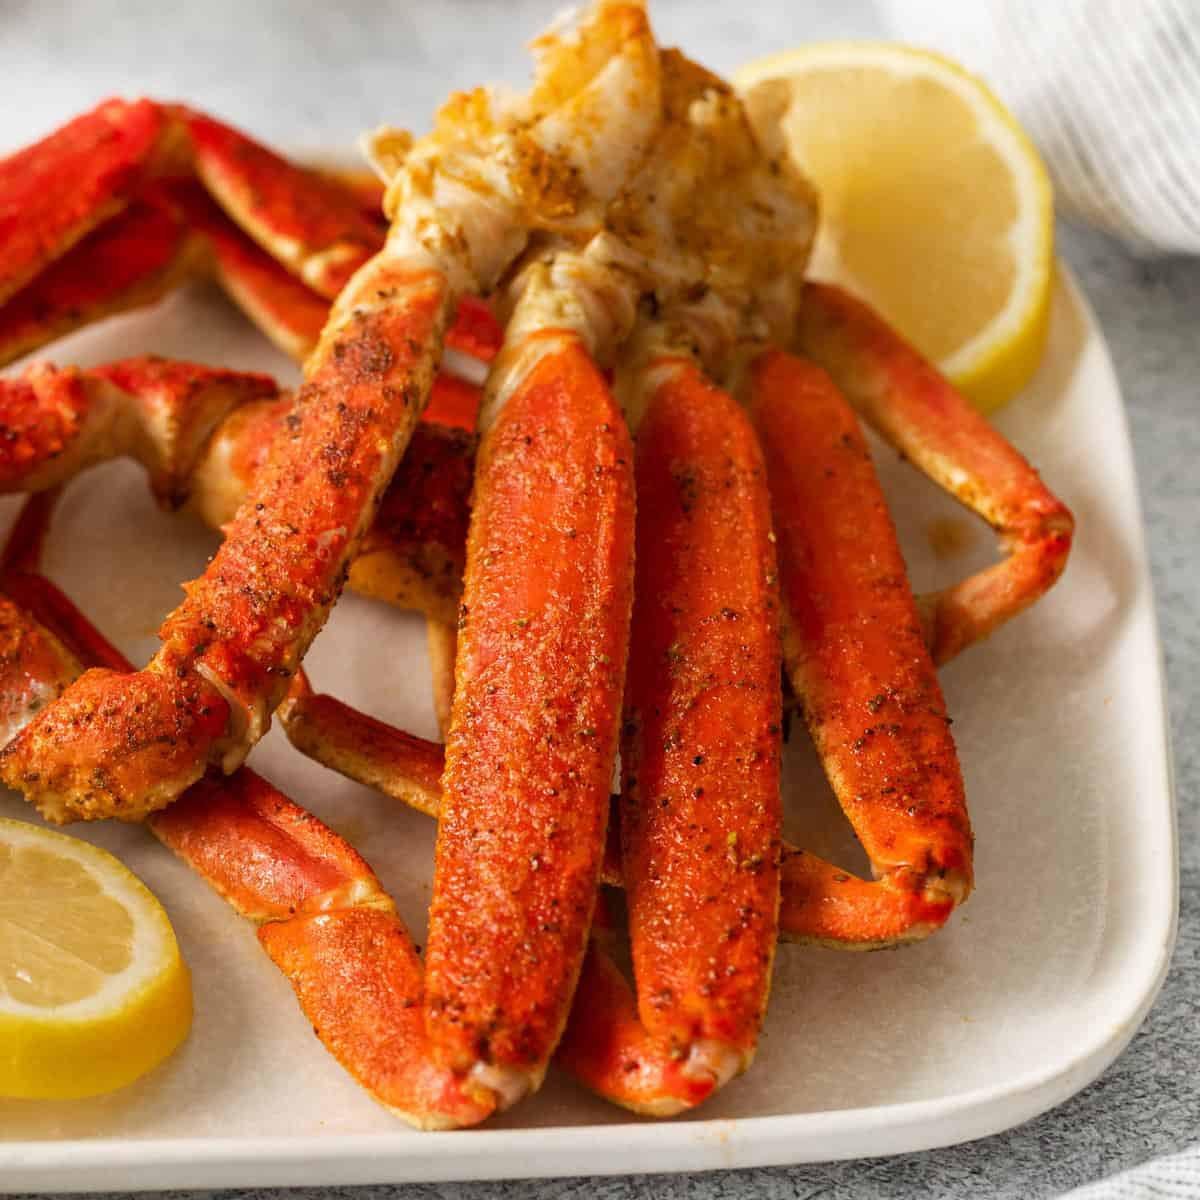 Indulge in one of tonight&rsquo;s features, and celebrate the weekend with us! 

&bull; Steamed Snow Crabs with Old Bay and Garlic Butter served with Roasted Red Bliss Potatoes 
&bull; Pan Seared Shrimp and Scallops on a bed of roasted Poblano Risott